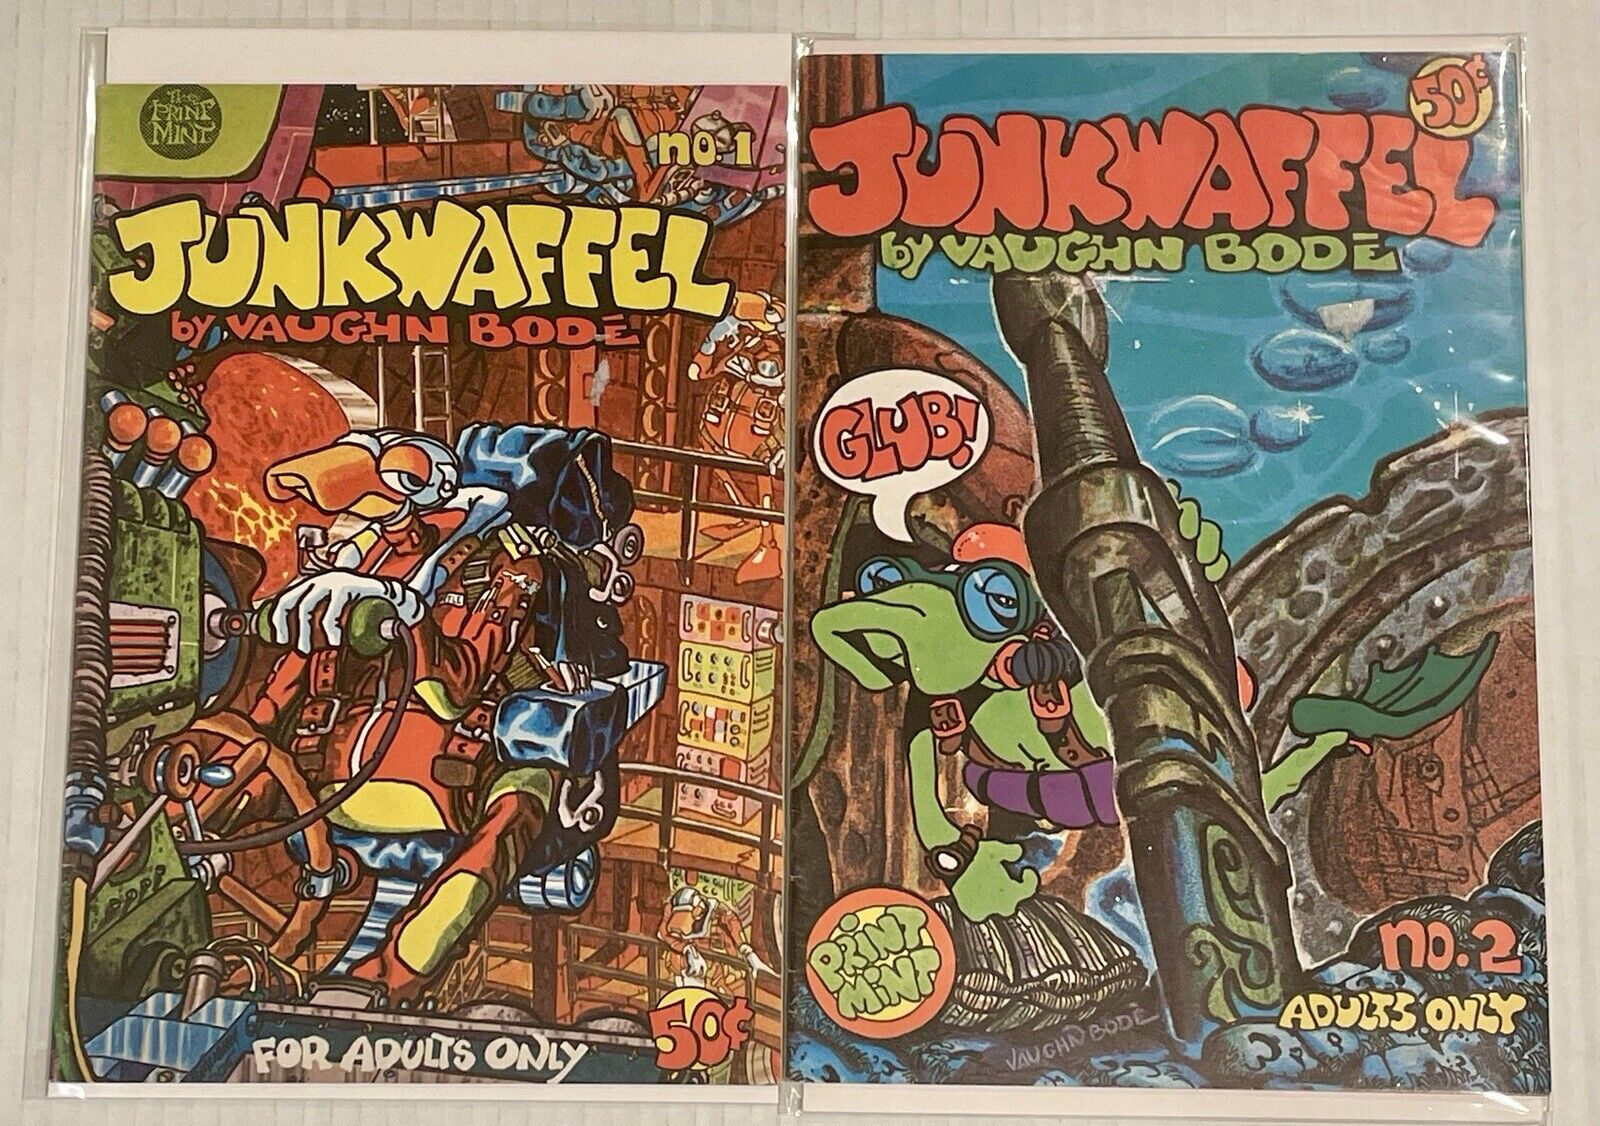 JunkWaffel # 1 And # 2 By Vaughn Bode Comic Both In Very Good Condition